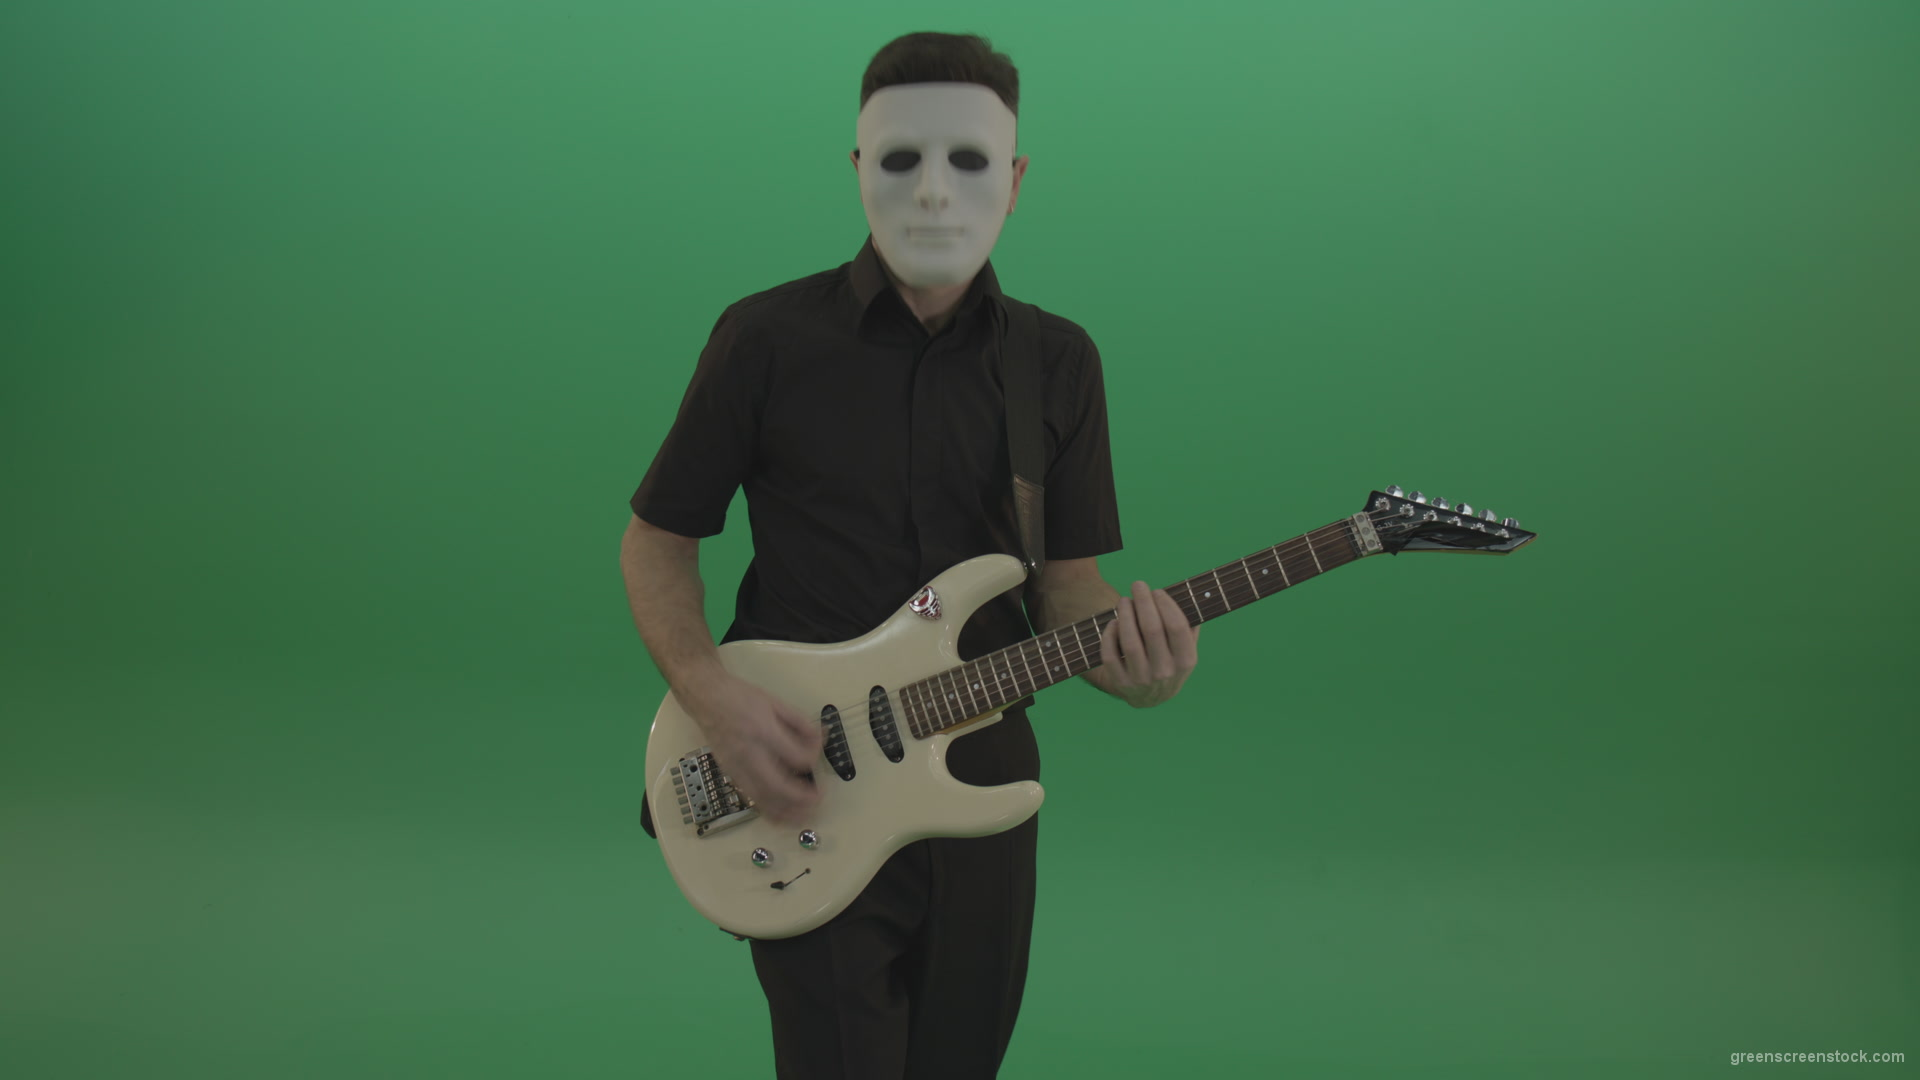 Rock-man-in-white-mask-and-black-wear-playing-guitar-isolated-on-green-screen-in-front-view_007 Green Screen Stock